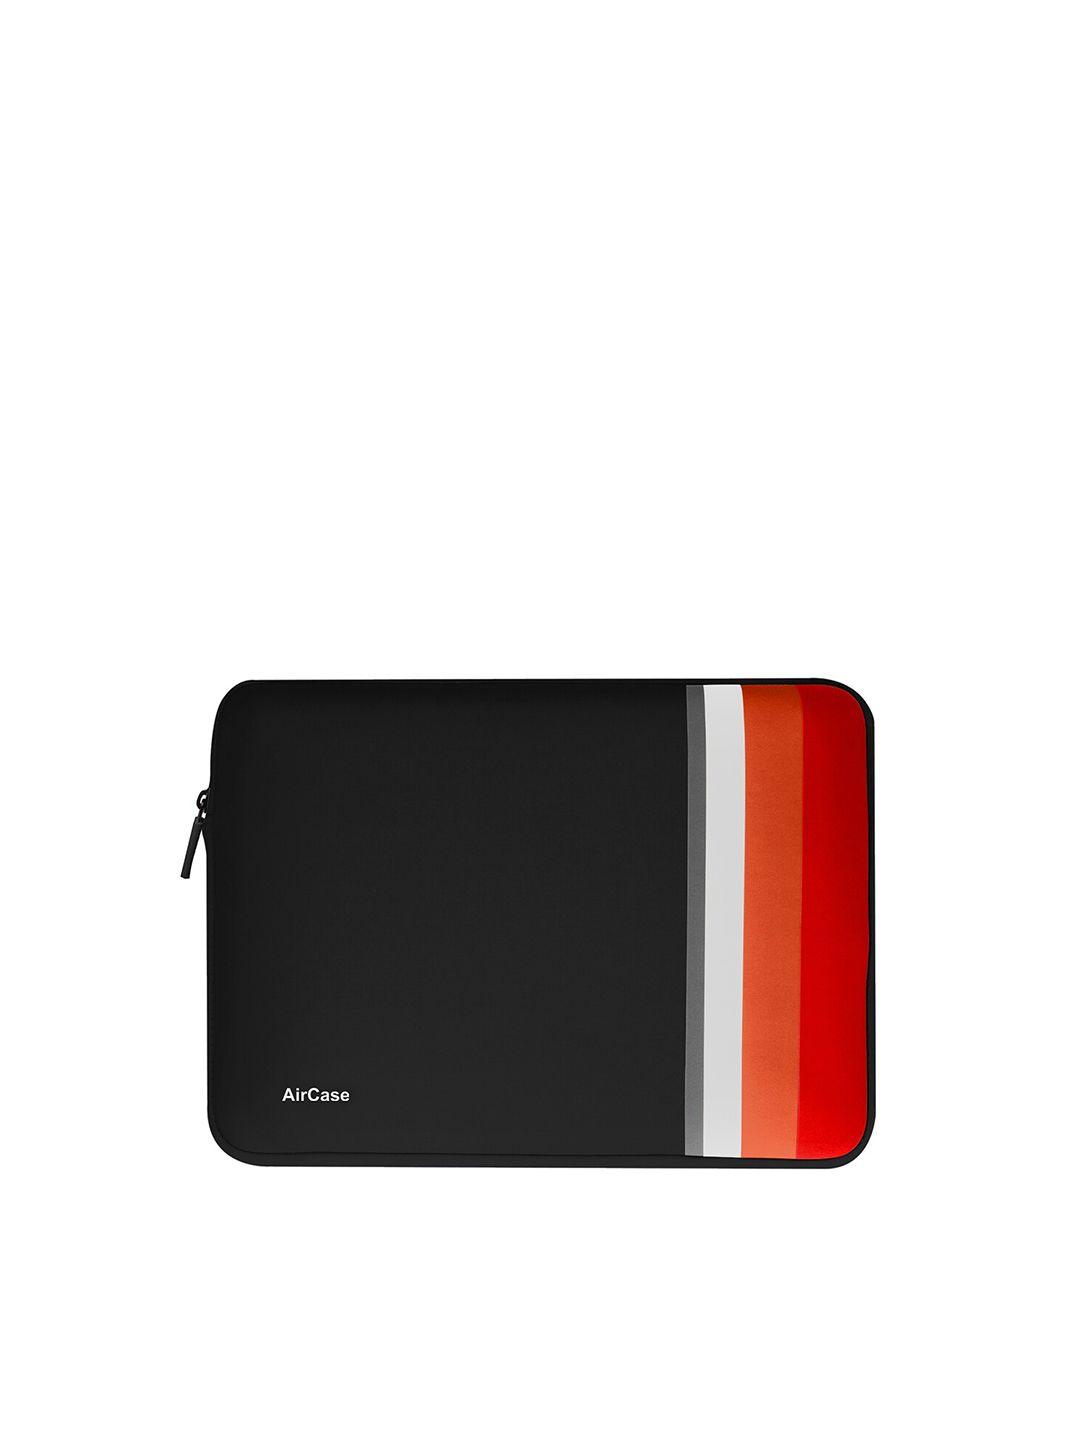 aircase unisex black & red solid 15.6 inch laptop sleeve